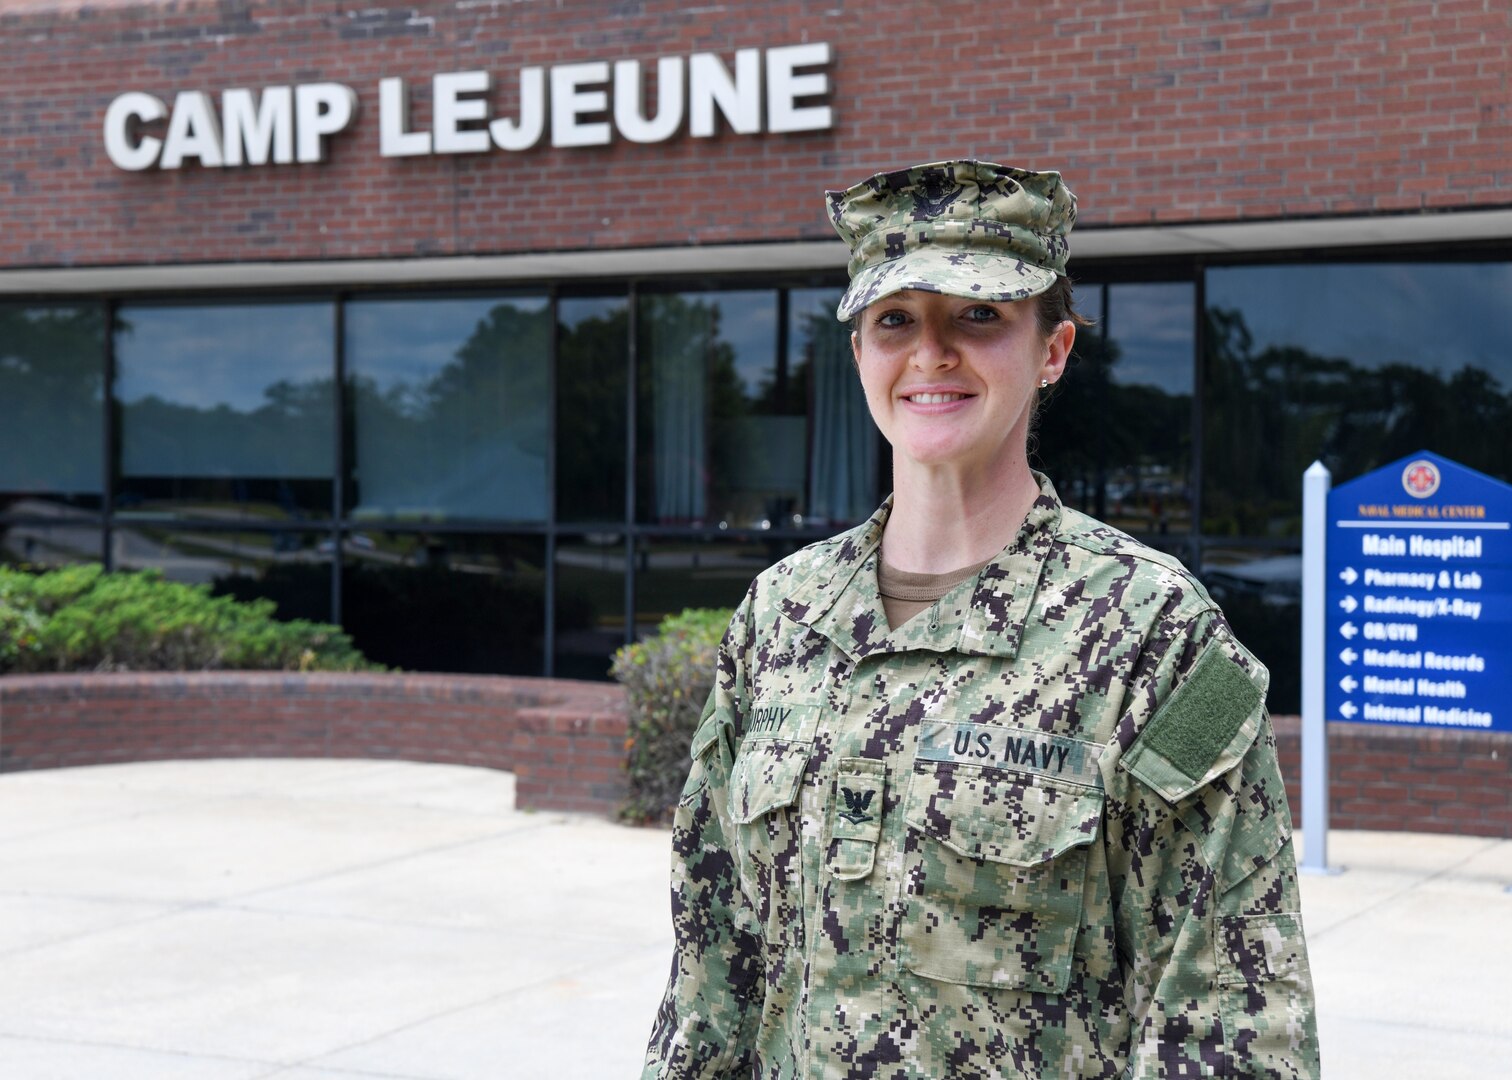 On June 3, 2022, while standing administrative duty at Naval Medical Center Camp Lejeune, U.S. Navy Petty Officer Third Class Danielle Murphy assisted in delivering a baby girl in the medical center parking lot.